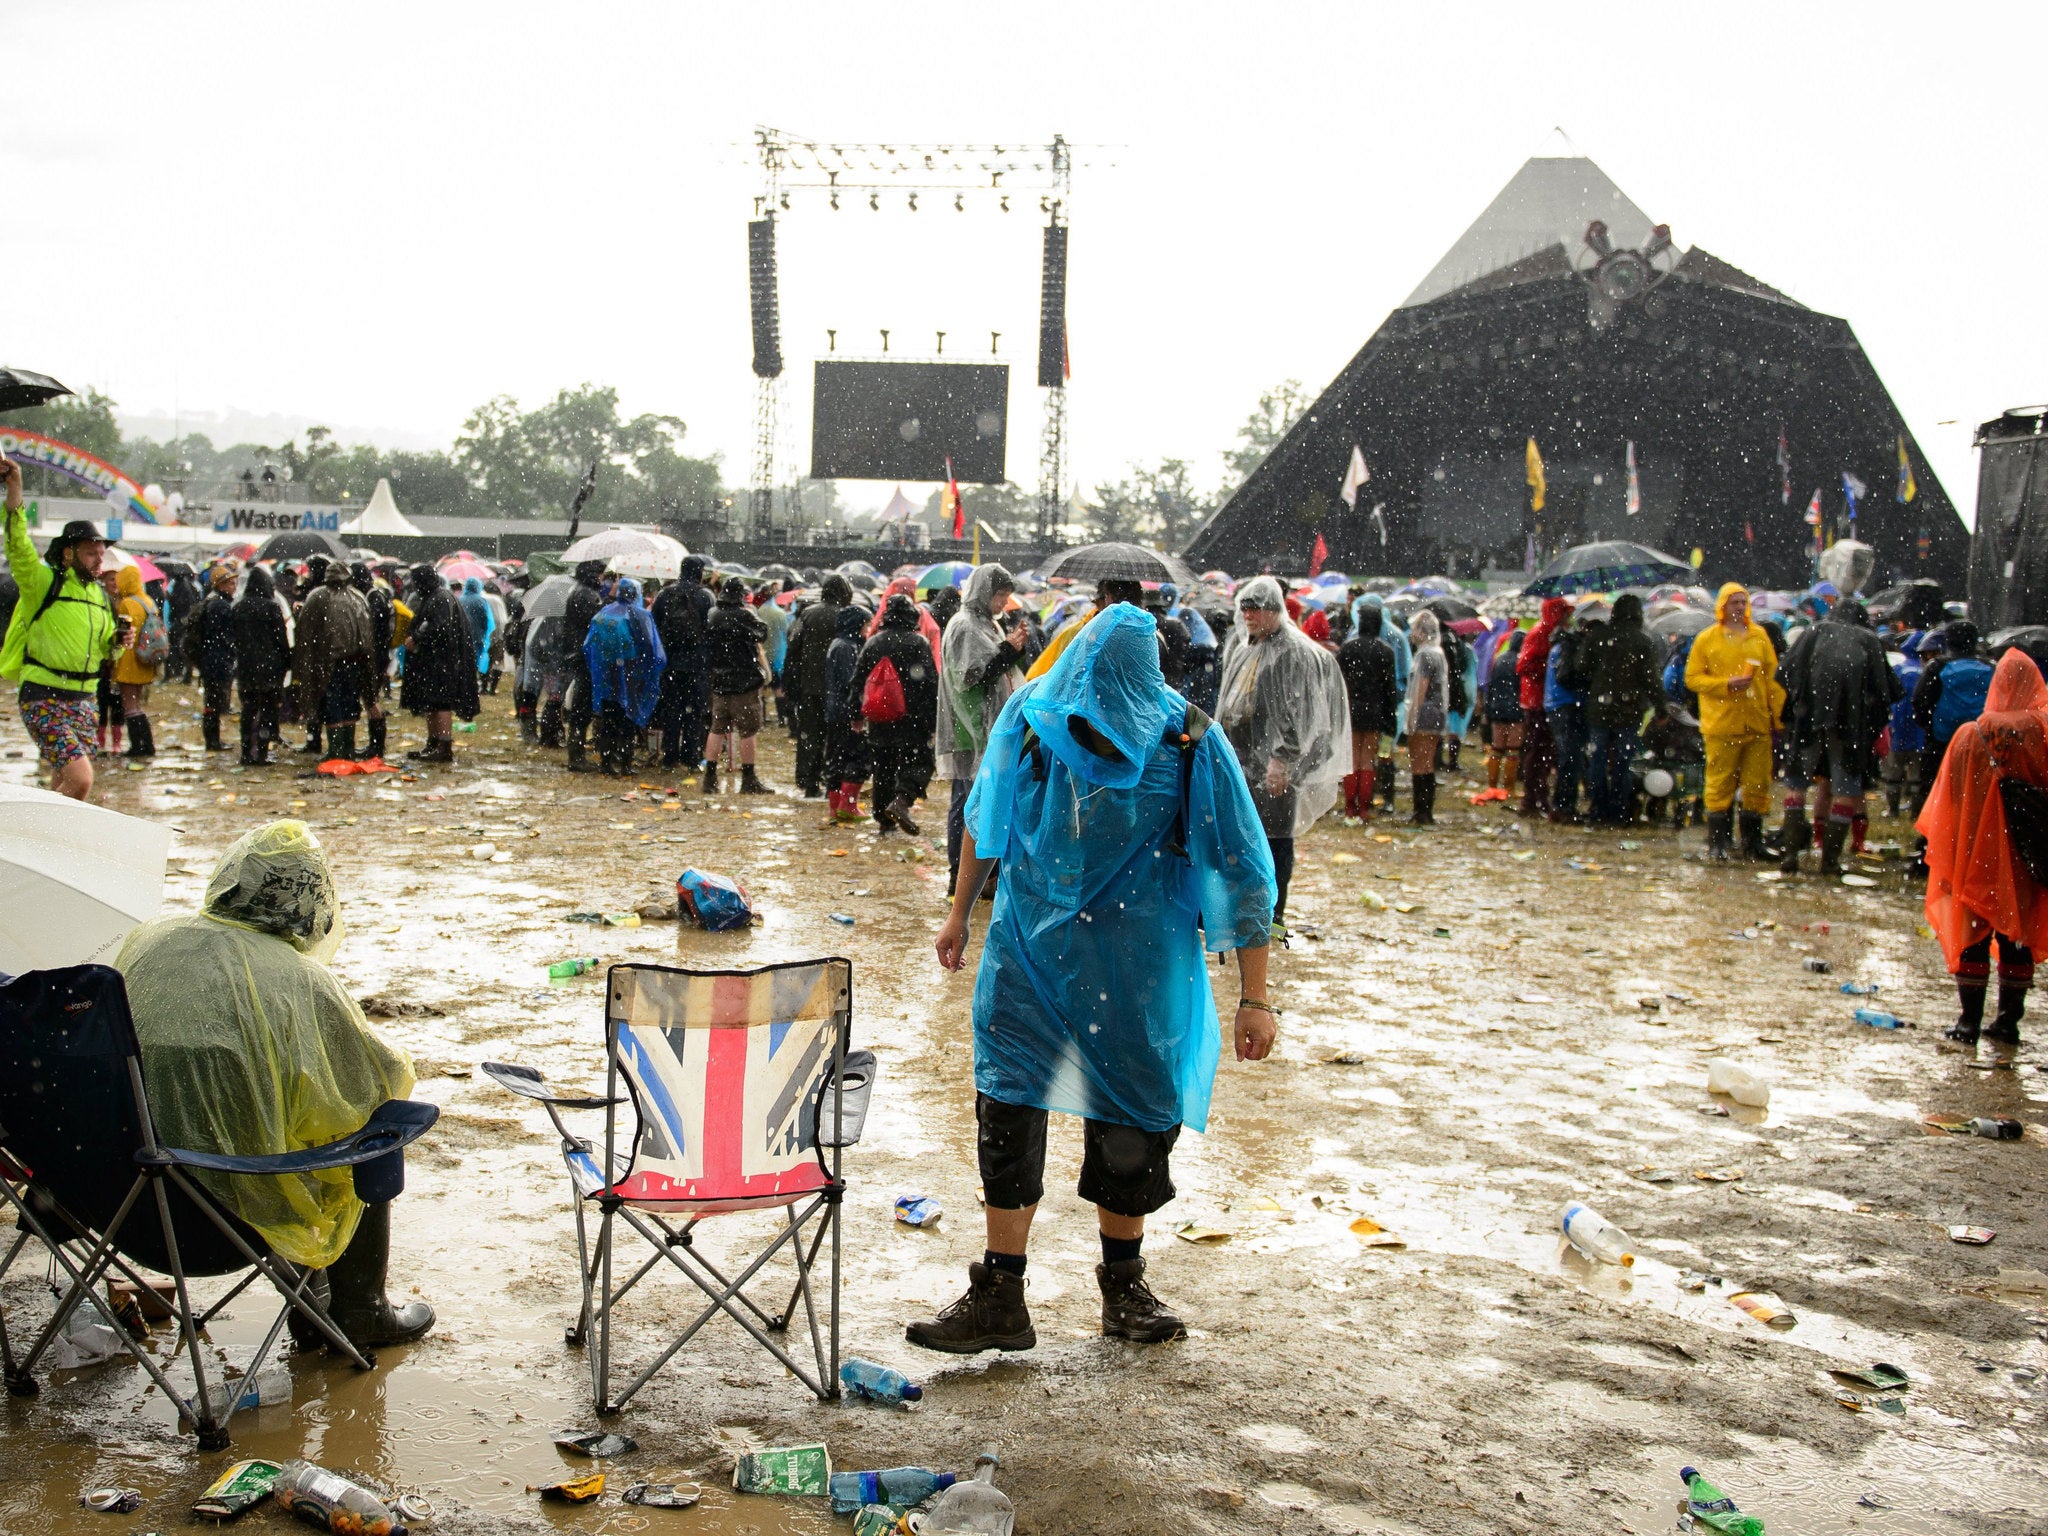 Hopefully there won't be a repeat of 2014's rain at this year's Glastonbury Festival